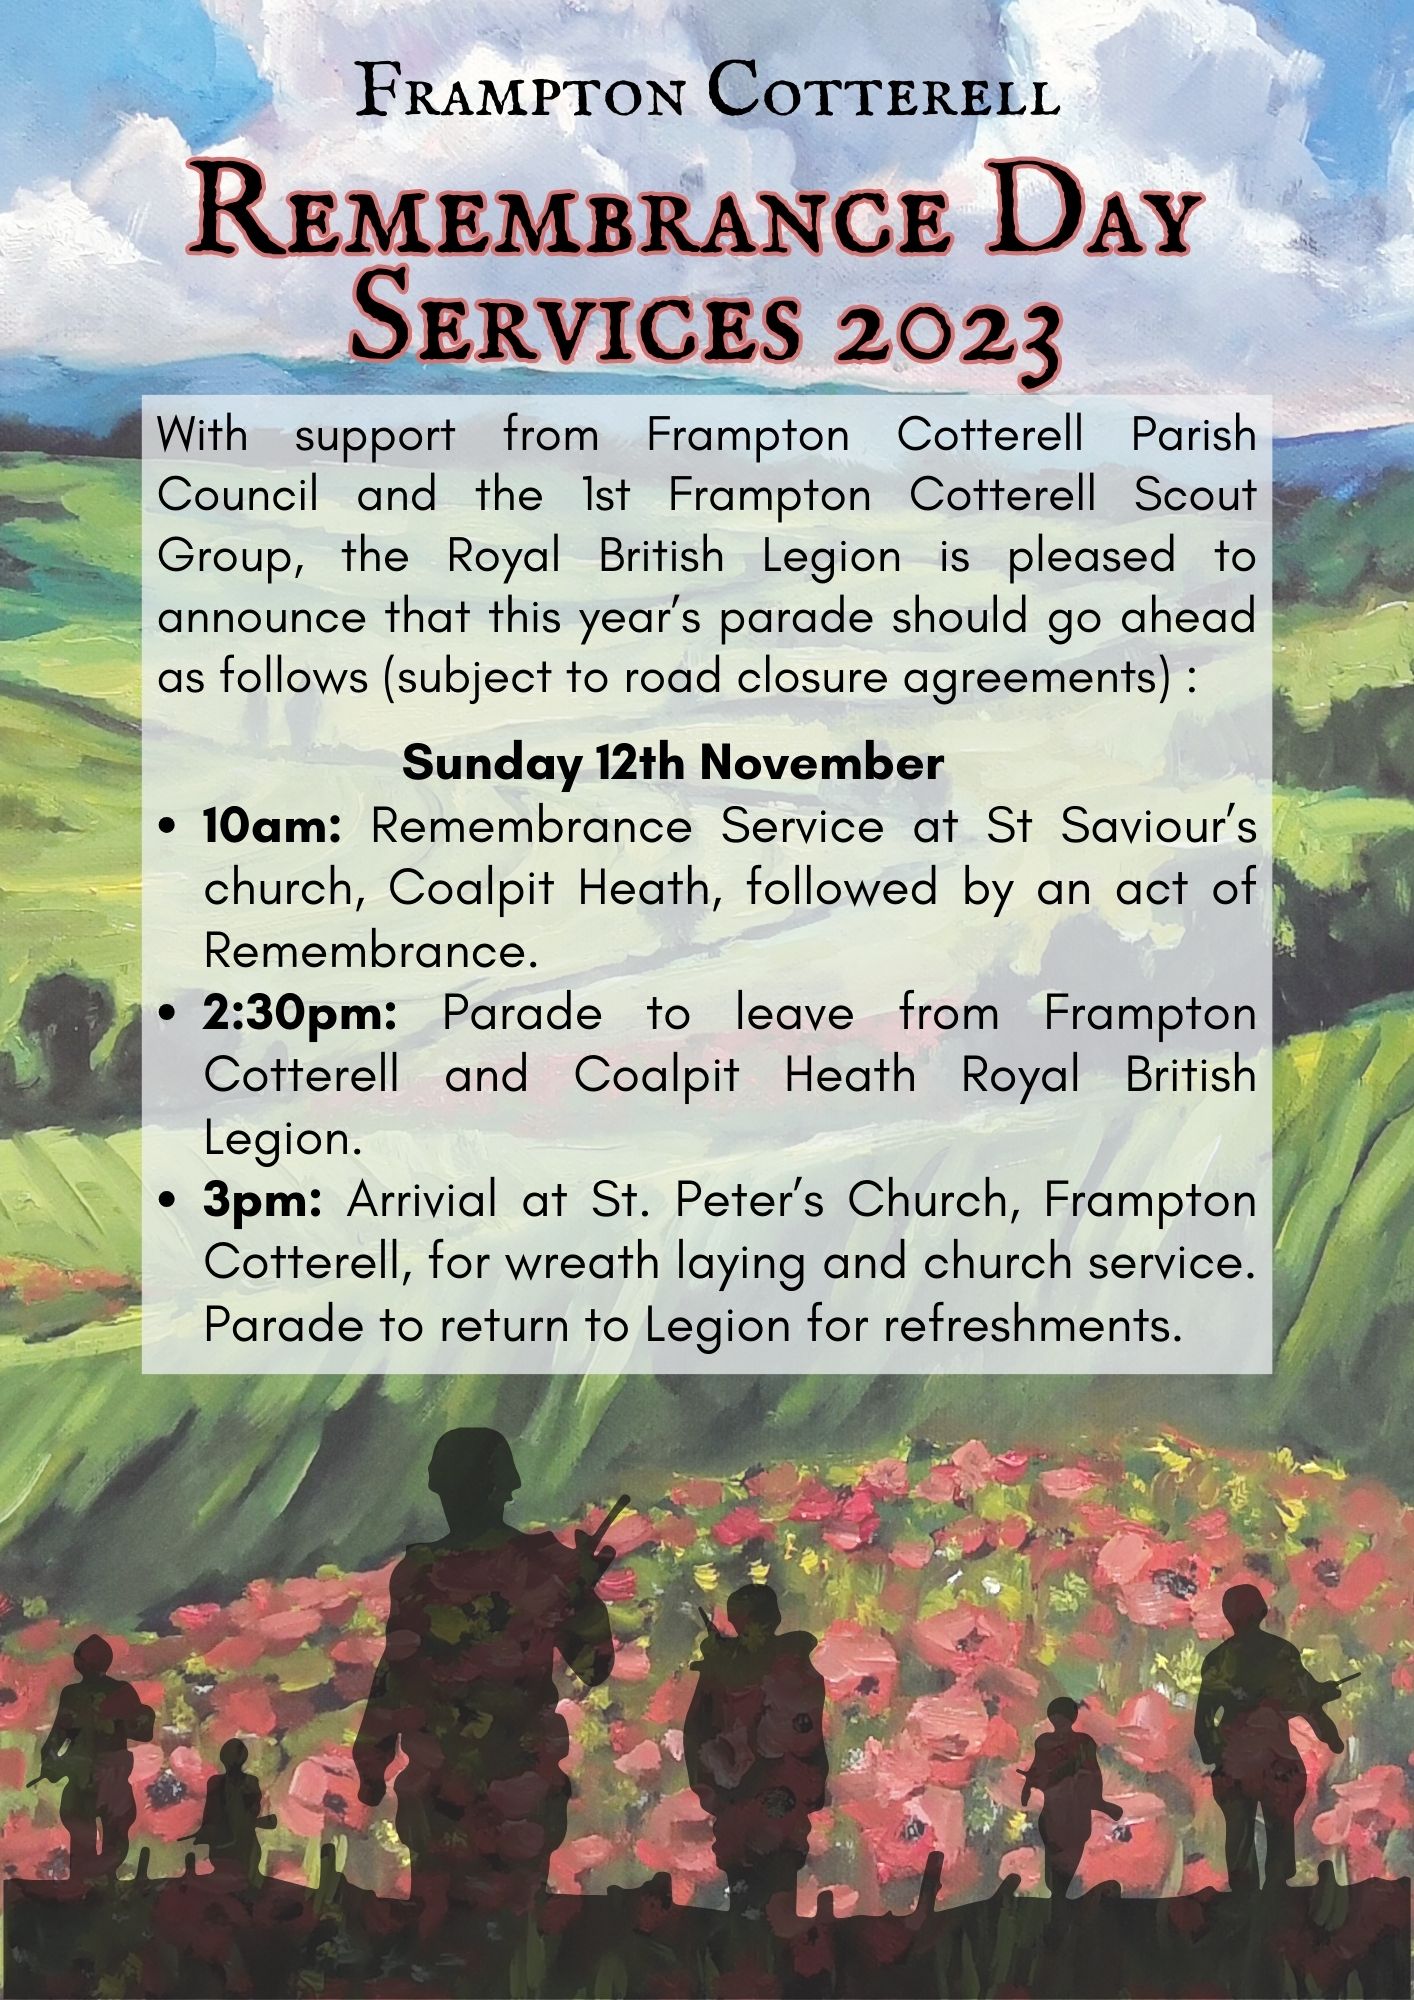 
Oil painting of a landscape, rolling green hills beneath a blue cloudy sky with poppies in the foreground. Overlaid with the silhouettes of soldiers at the bottom. Text reads, Frampton Cotterell Remembrance Day Services 2023. With support from Frampton Cotterell Parish Council and the 1st Frampton Cotterell Scout Group, the Royal British Legion is pleased to announce that this year’s parade should go ahead as follows (subject to road closure agreements): Sunday 12th November ▪️ 10am: Remembrance Service at St Saviour’s church, Coalpit Heath, followed by an act of Remembrance.
▪️ 2:30pm: Parade to leave from Frampton Cotterell and Coalpit Heath Royal British Legion.
▪️ 3pm: Arrivial at St. Peter’s Church, Frampton Cotterell, for wreath laying and church service. Parade to return to Legion for refreshments.
